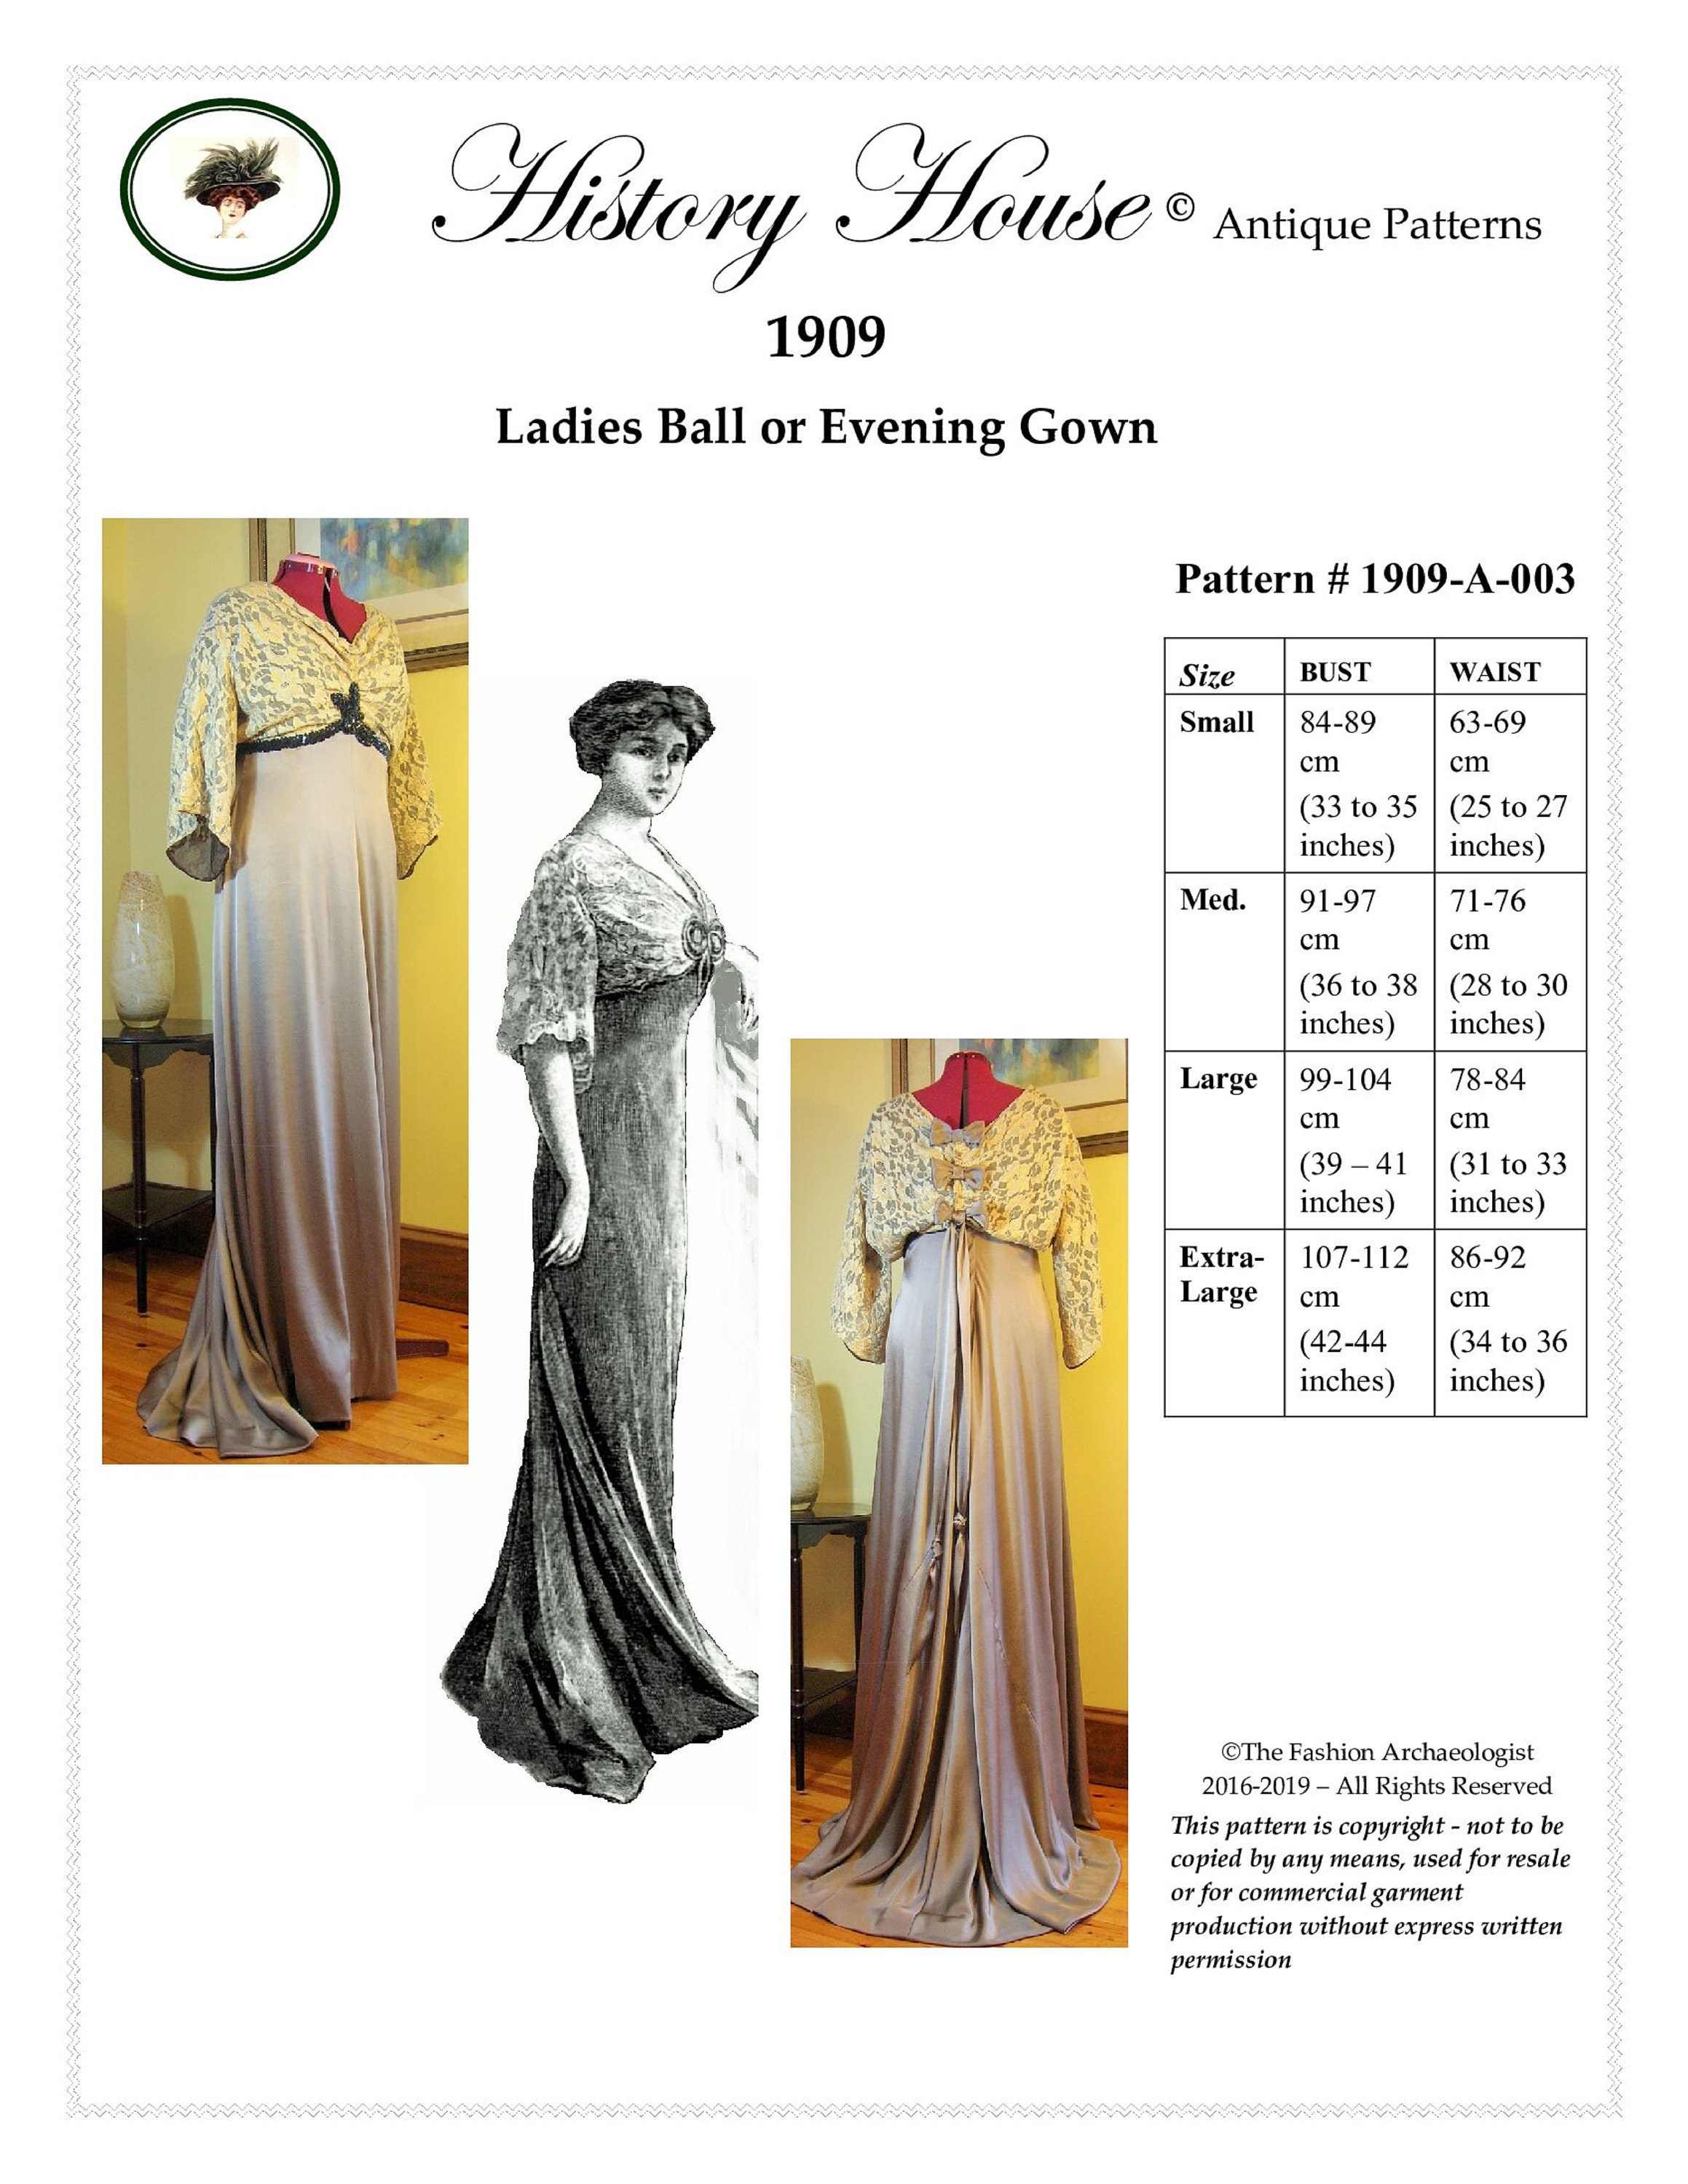 Dress - Museum Collection (Chicago History Museum) - CARLI Digital  Collections